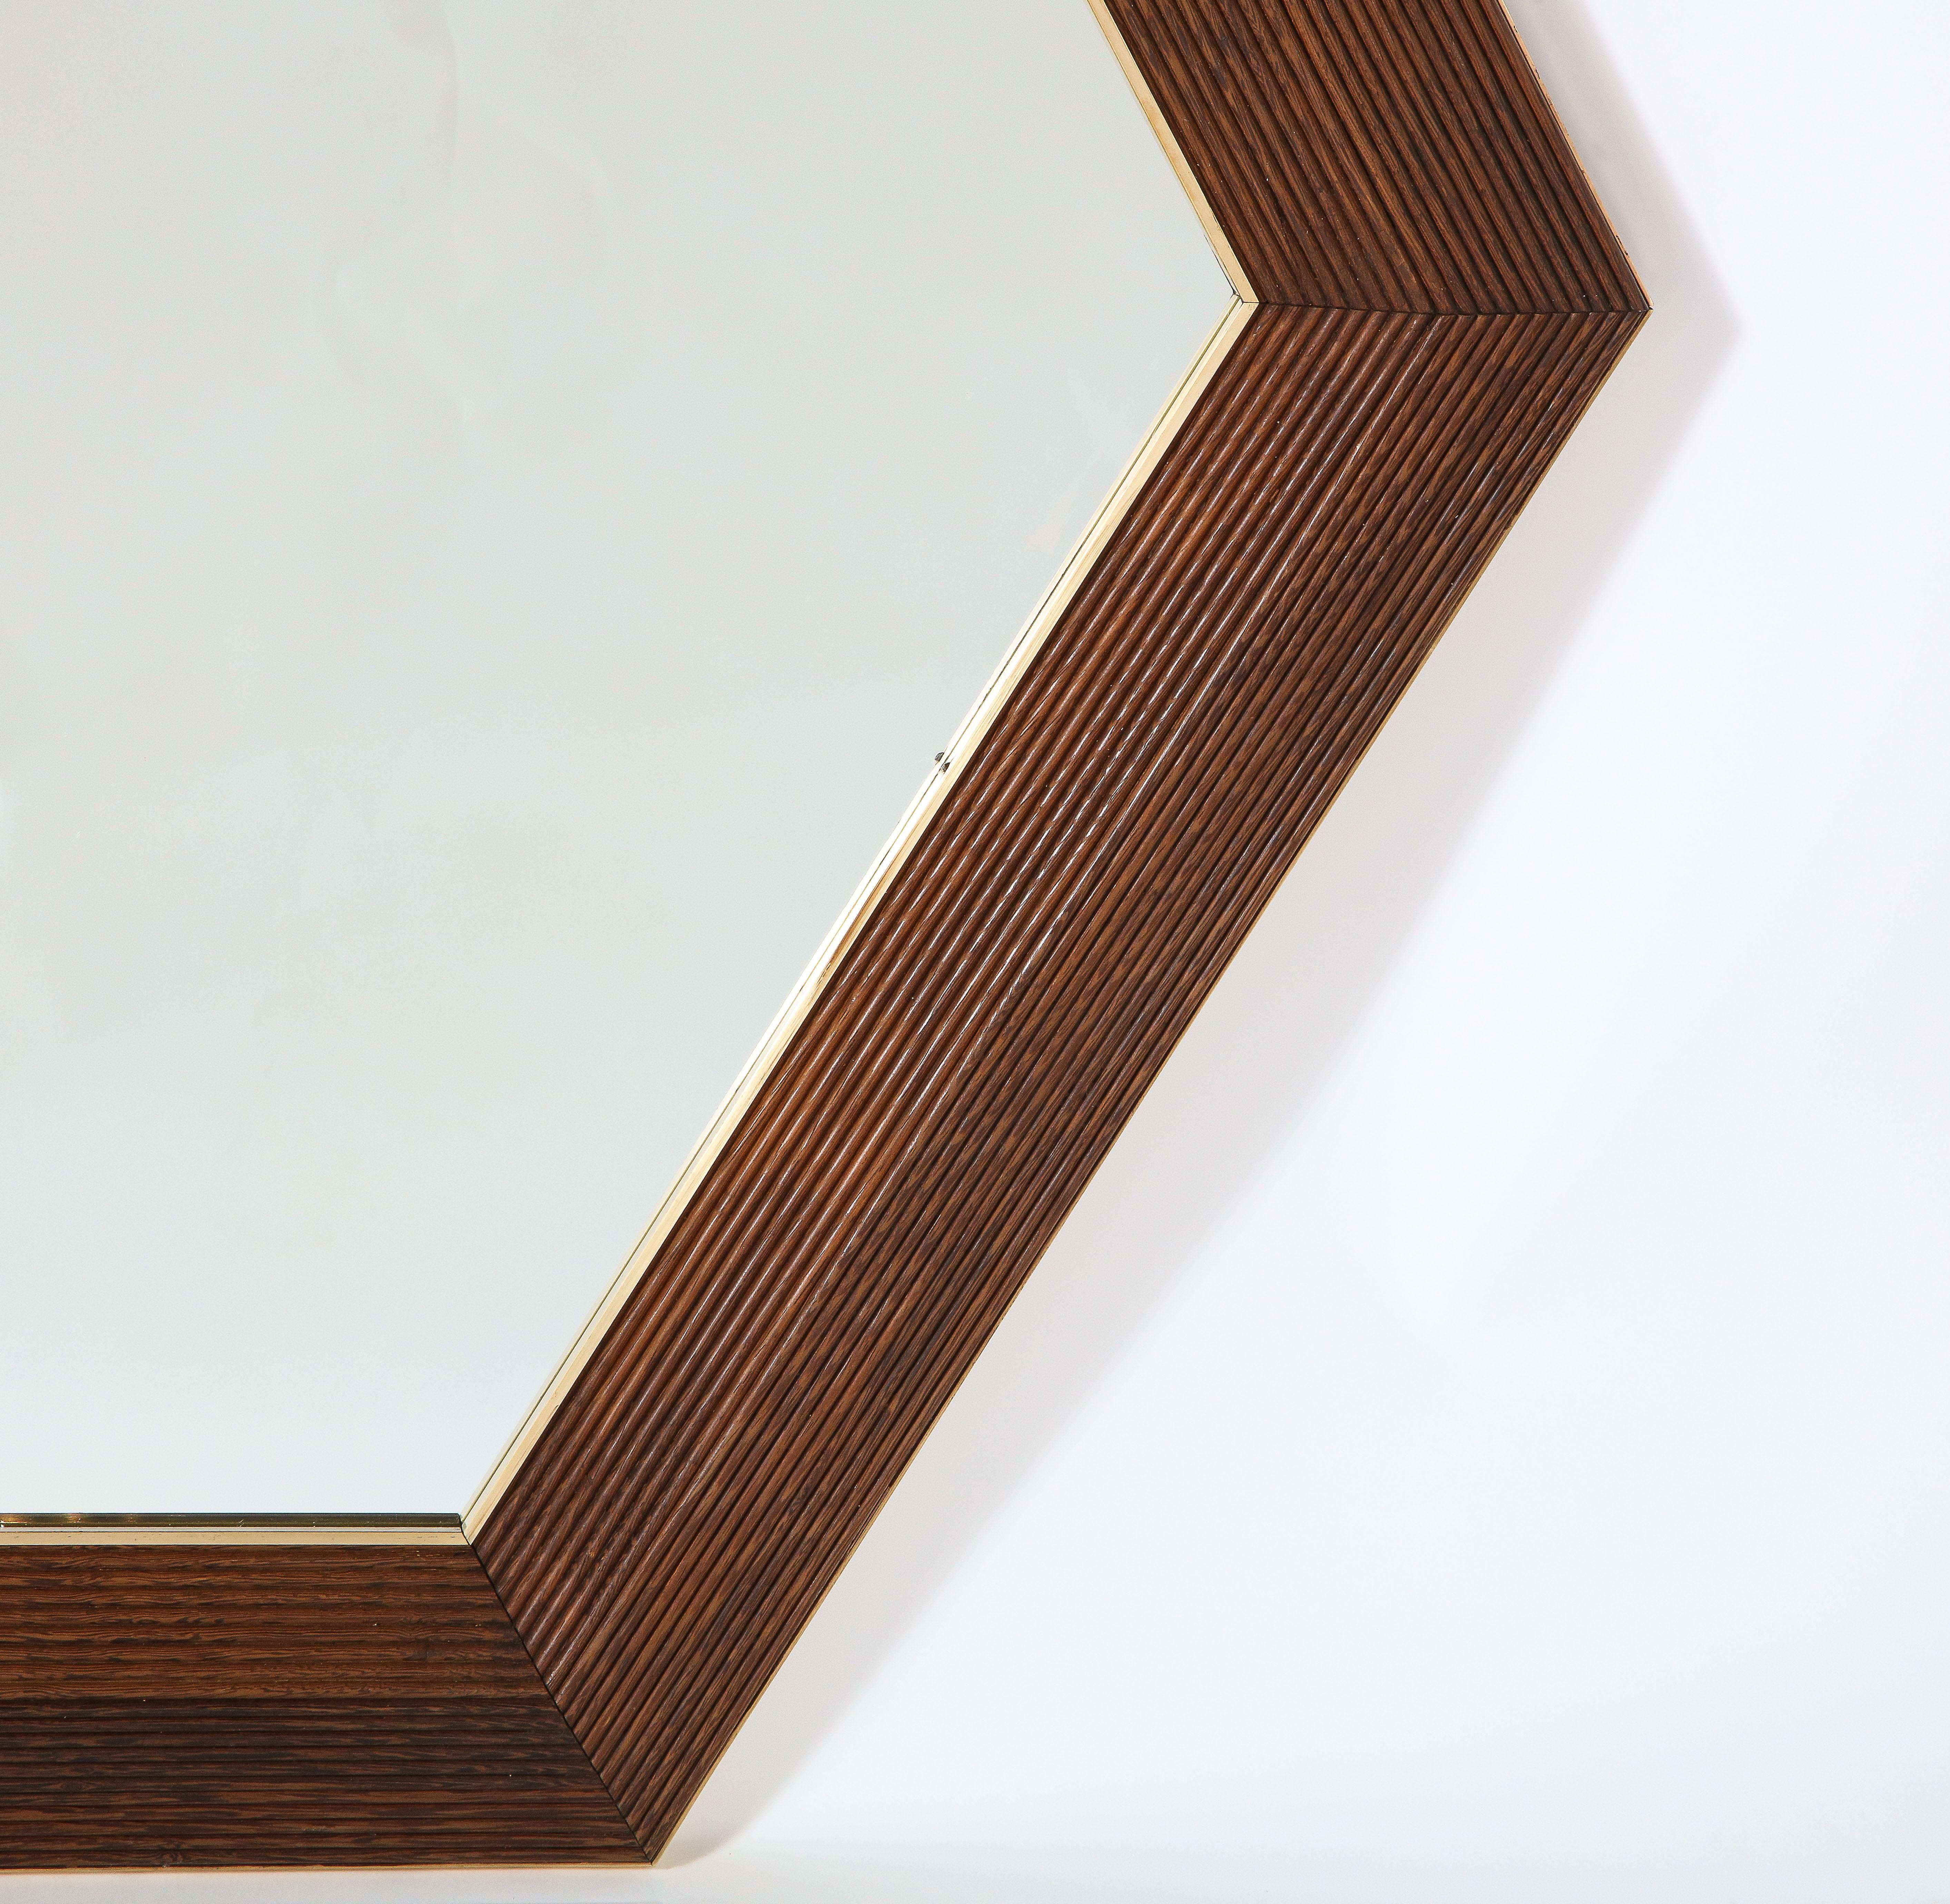 Carved walnut hexagonal shaped mirror with brass surround.  Majestic in scale, with beautiful and rich grained walnut and simple brass trim. 
Italy, contemporary 
Size: 48